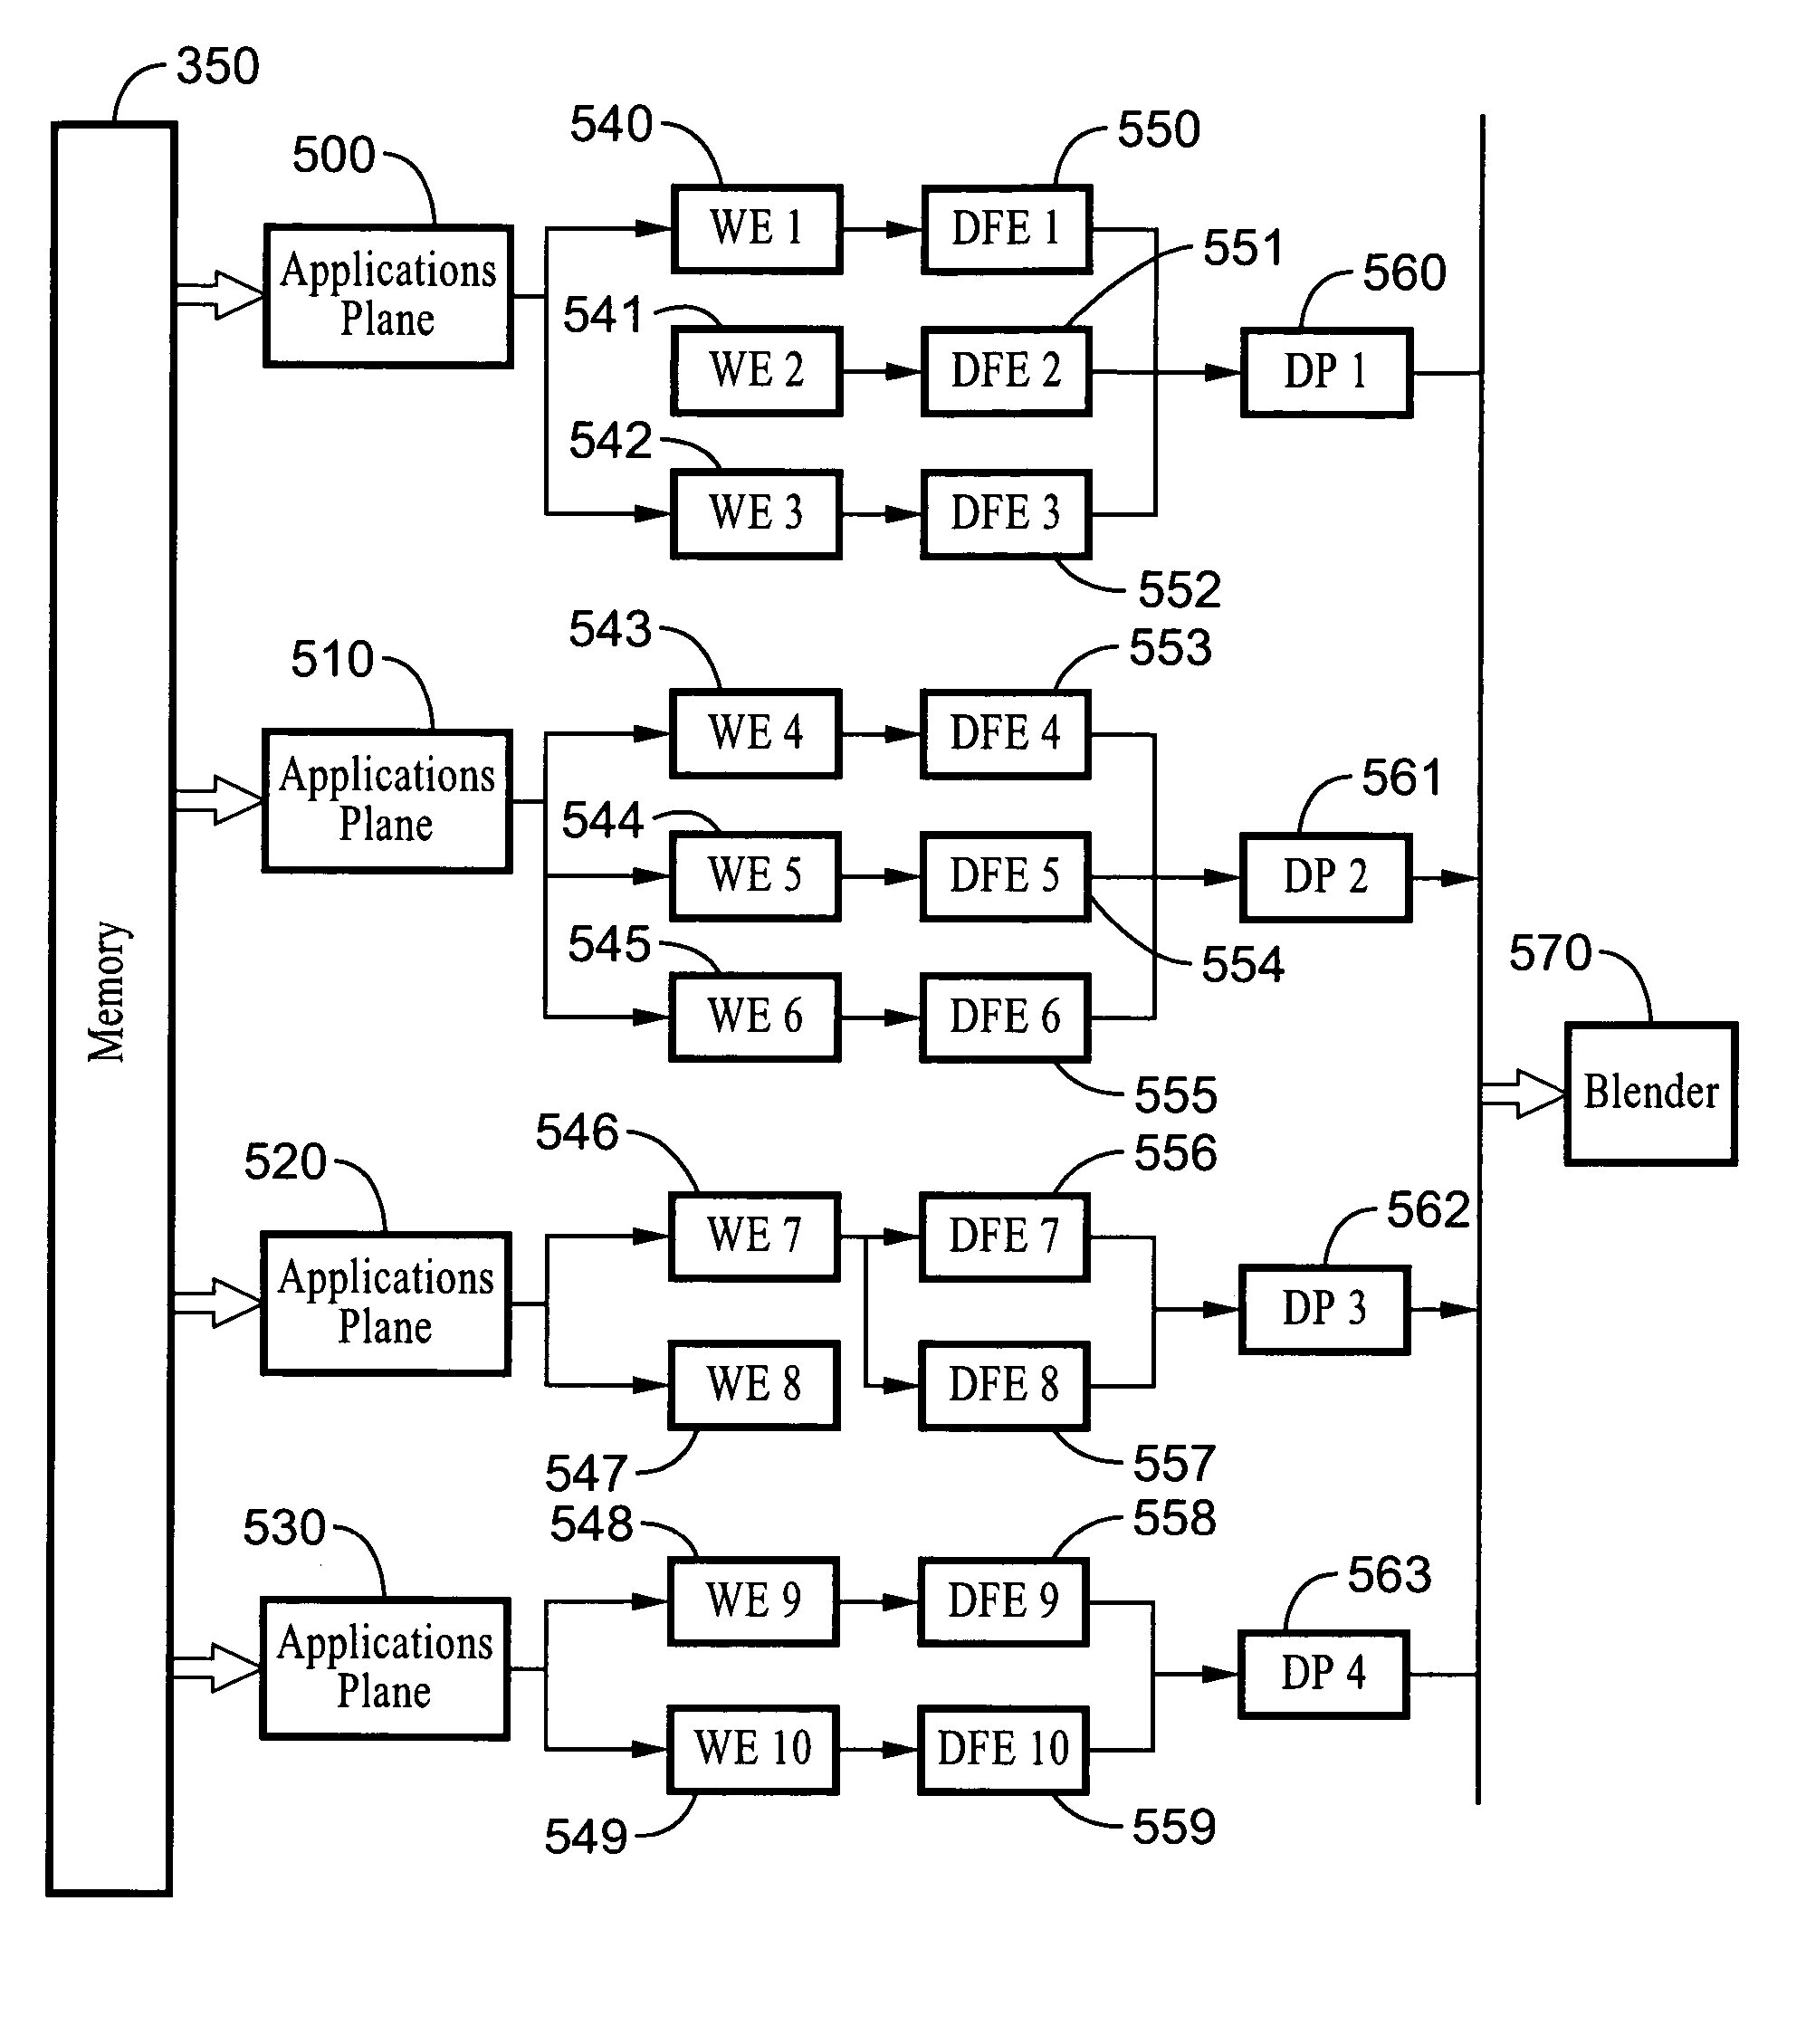 Time sliced architecture for graphics display system